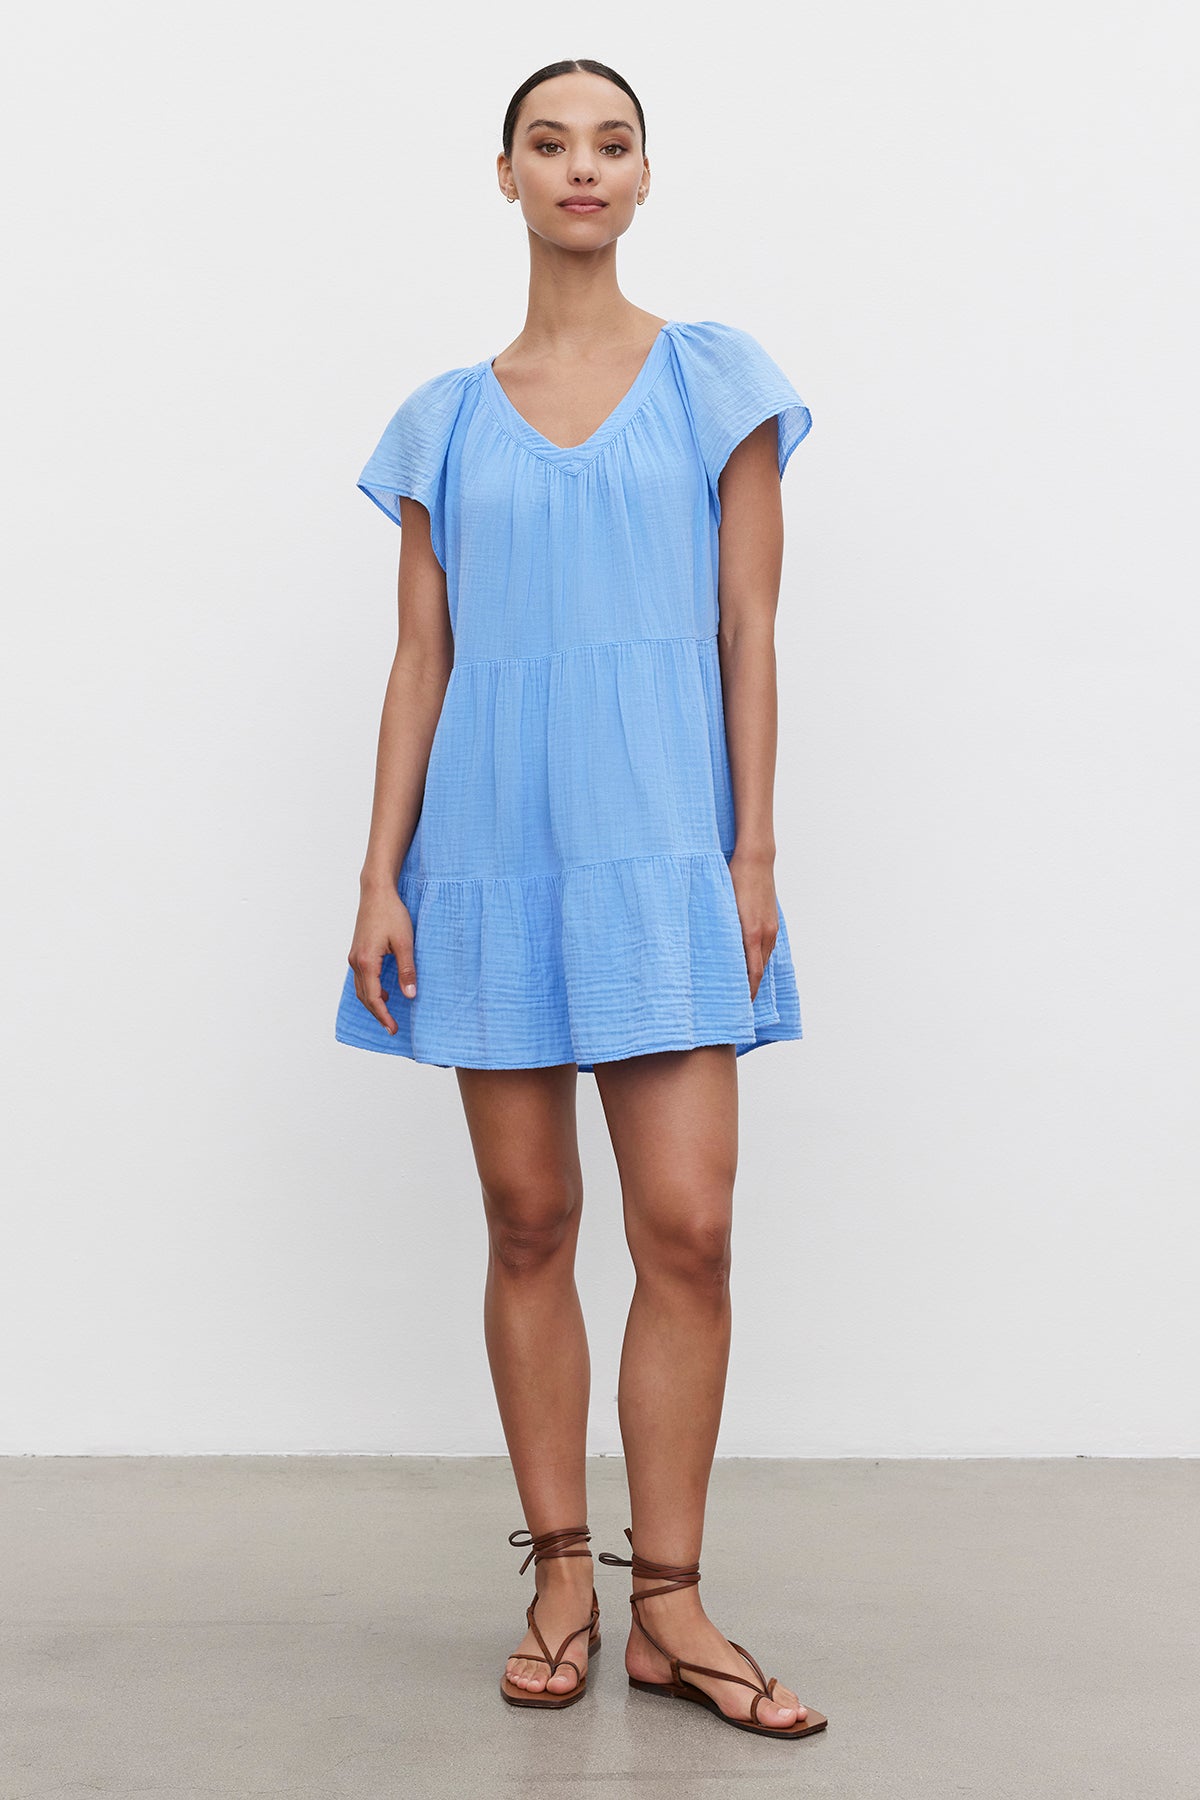 A woman in a light blue ELEANOR COTTON GAUZE TIERED DRESS by Velvet by Graham & Spencer with flutter sleeves and brown sandals stands confidently against a white background.-36443482620097